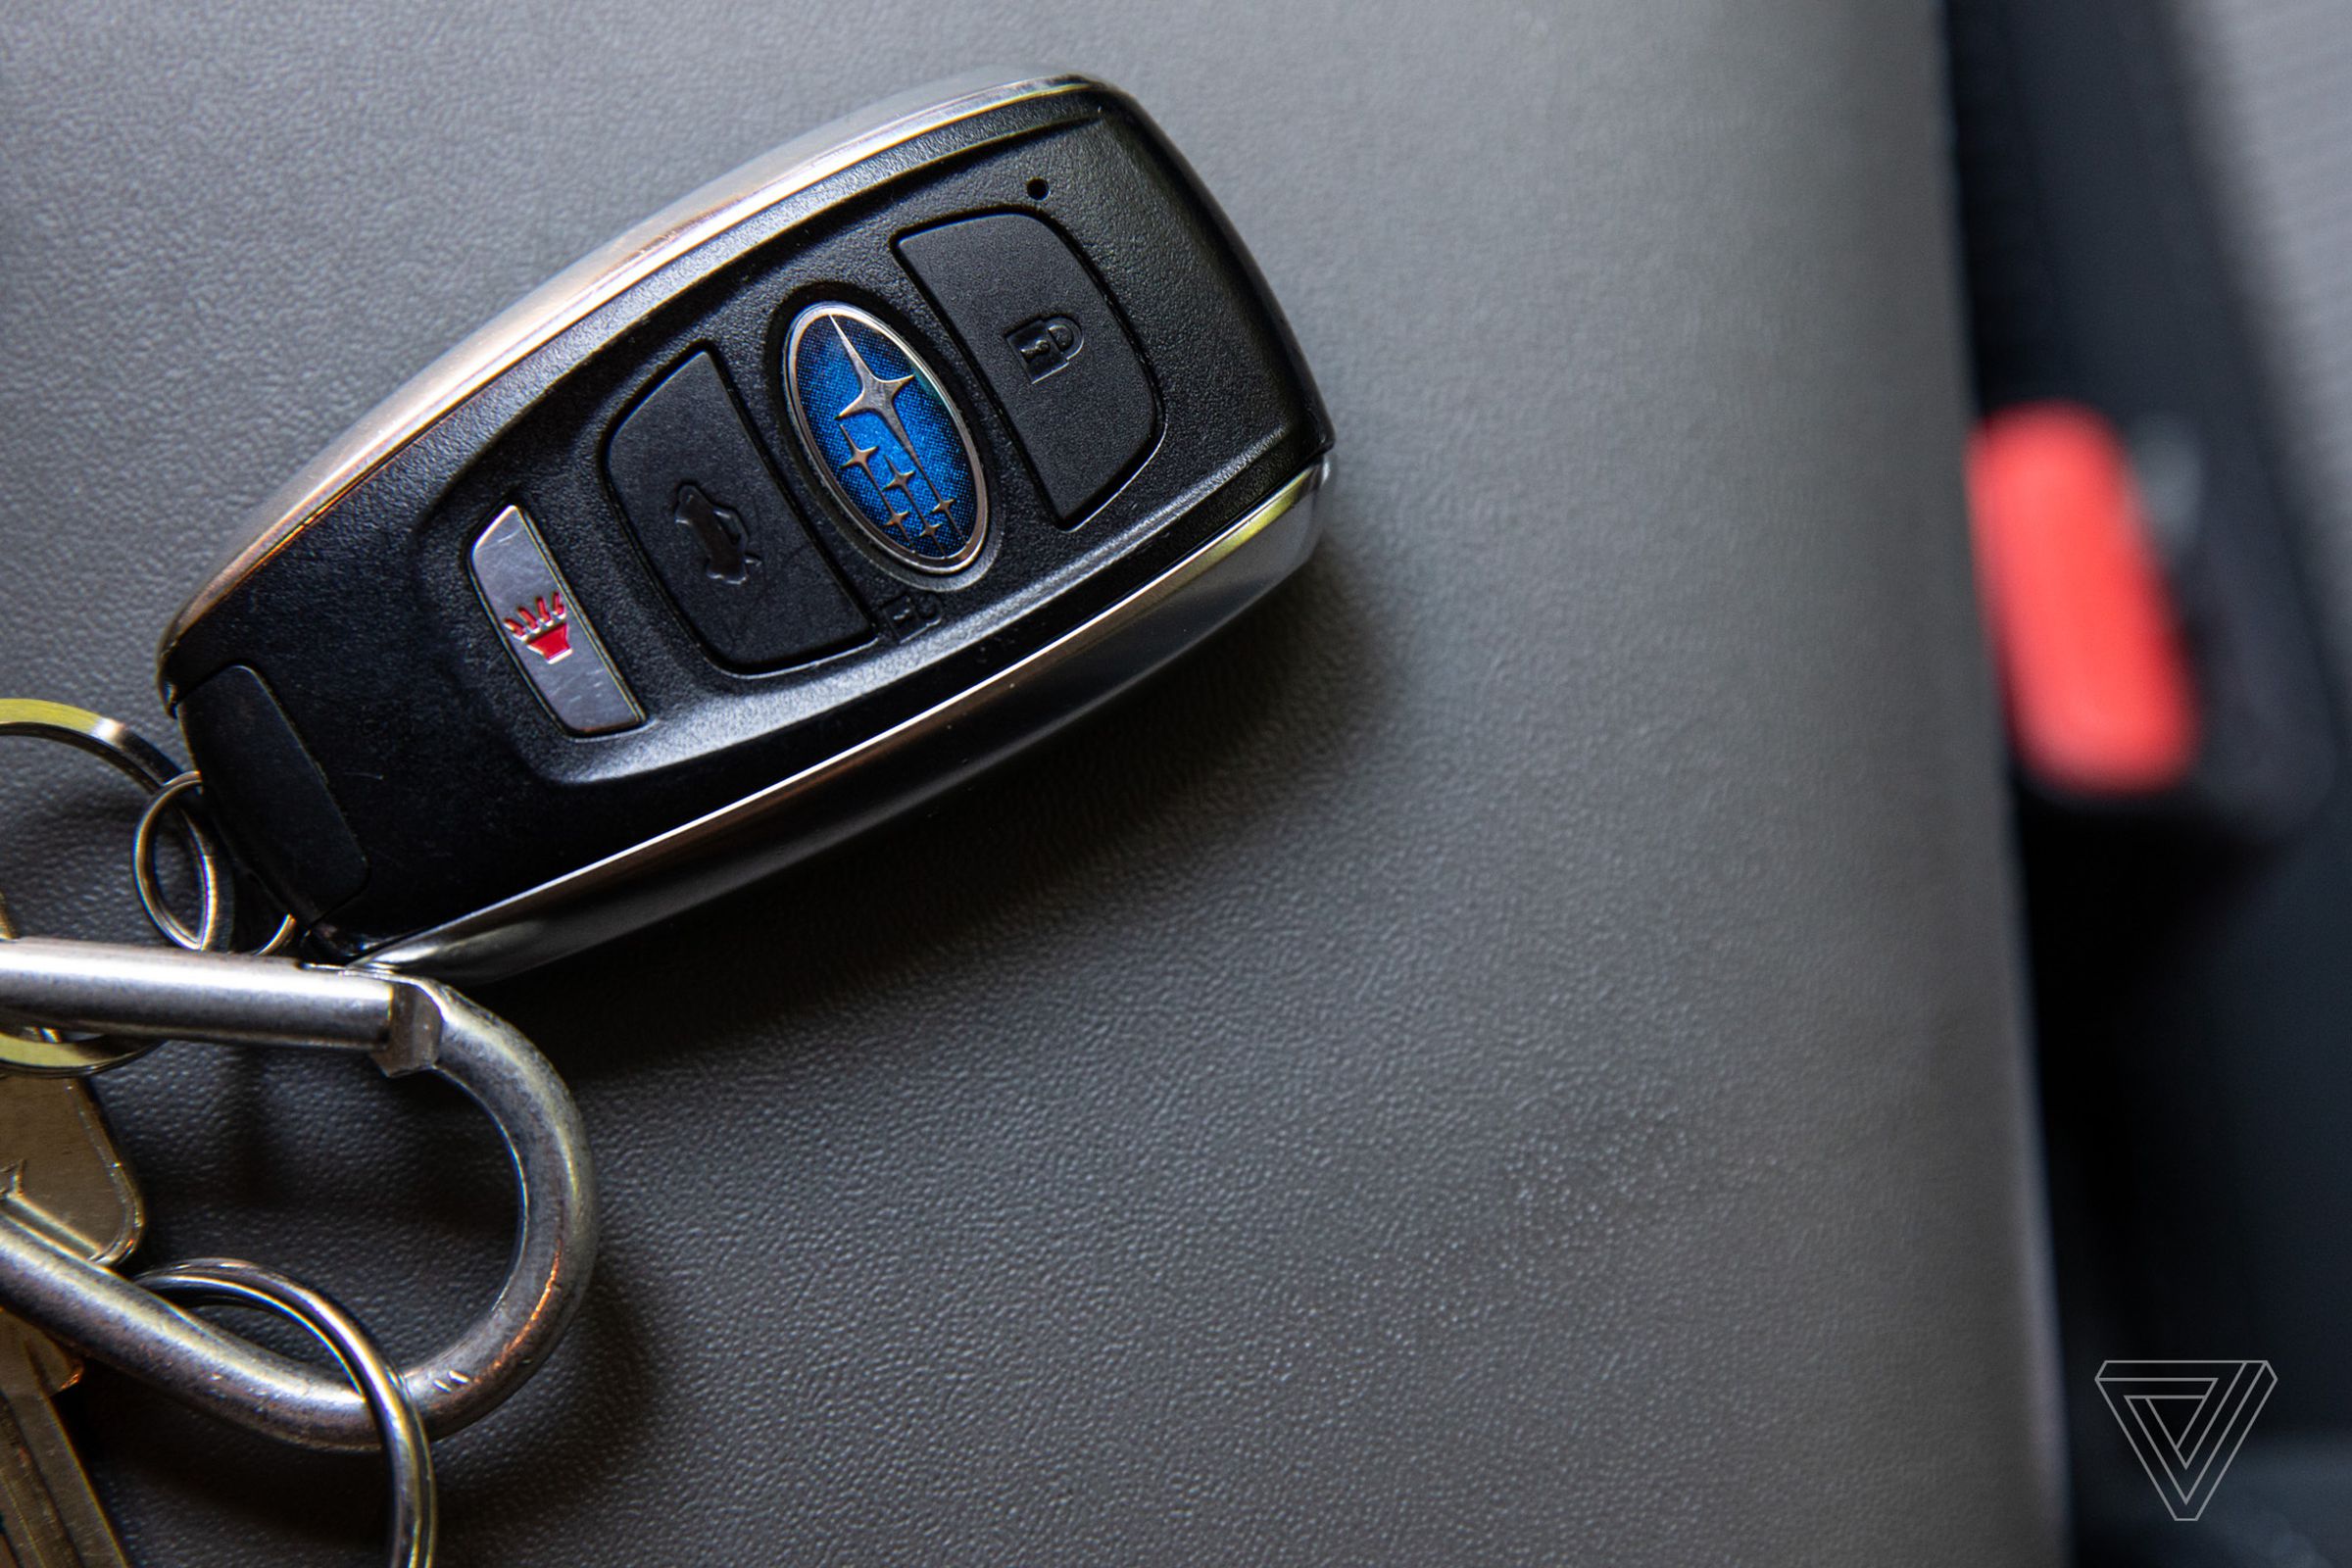 The key fobs for push to start cars usually don’t include a metal blade, making them more comfortable in the pocket than traditional keys.